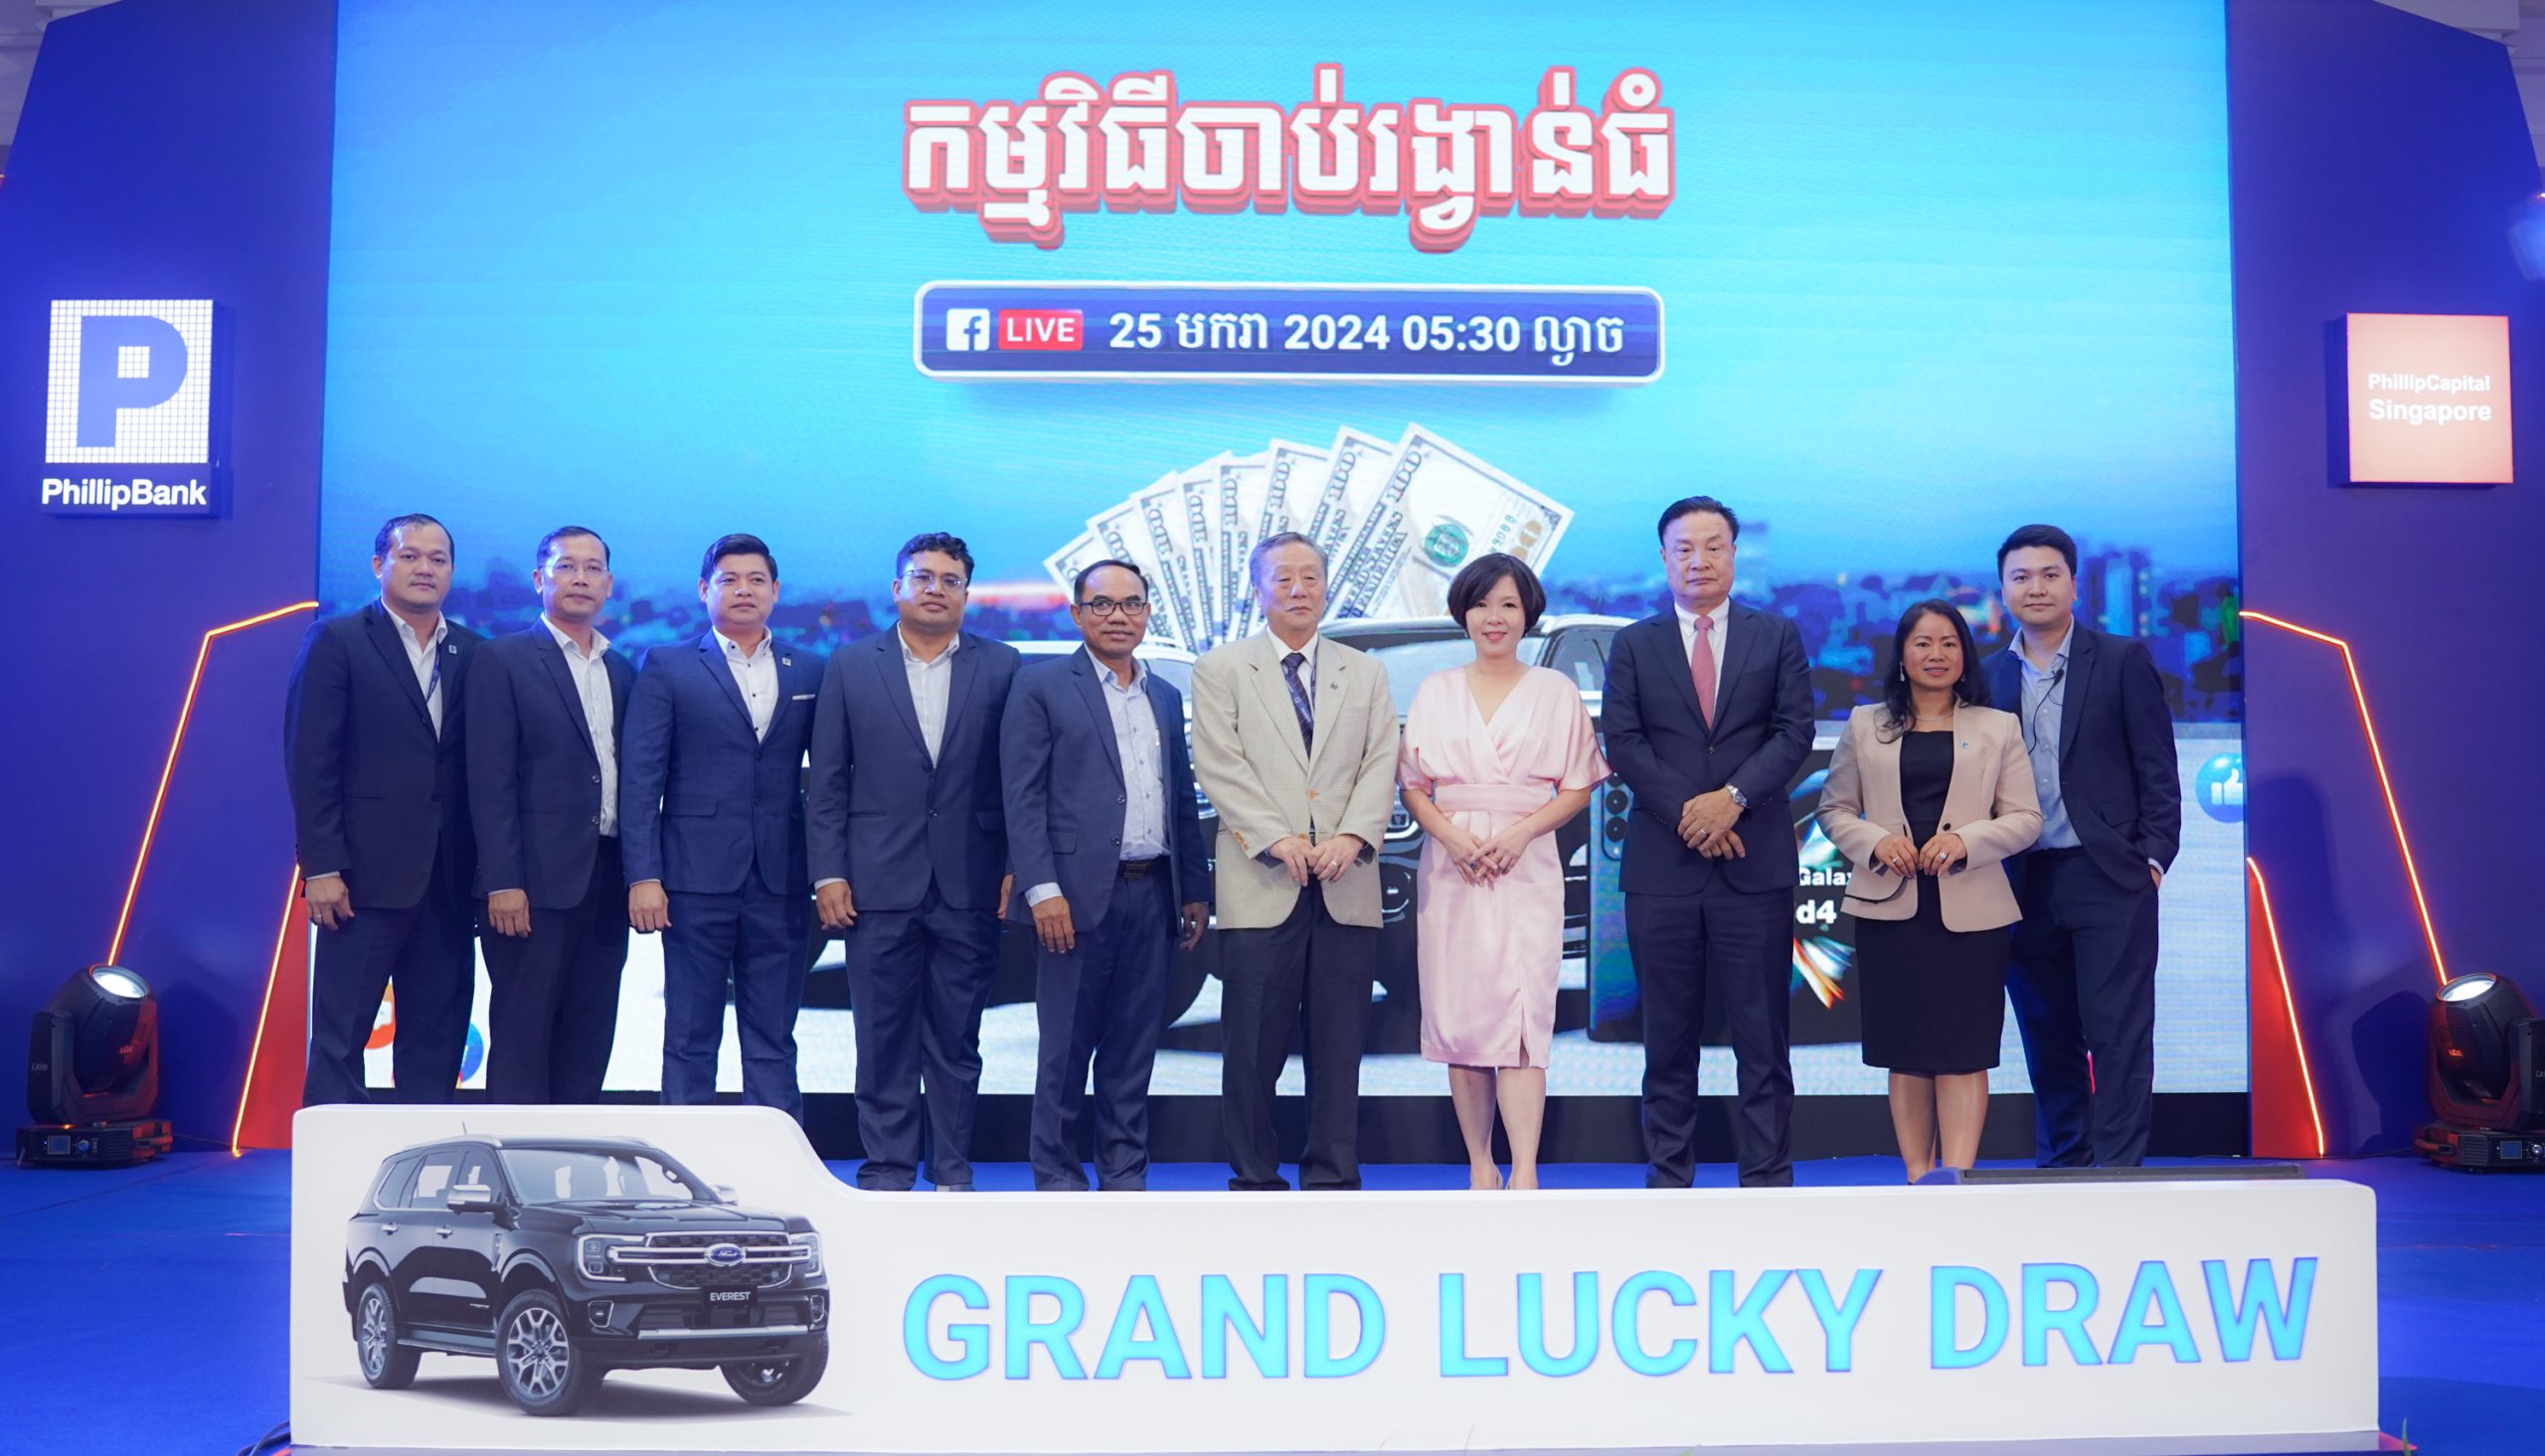 Phillip Bank Held Grand Lucky Draw of “Return Like Never Before” Promotion